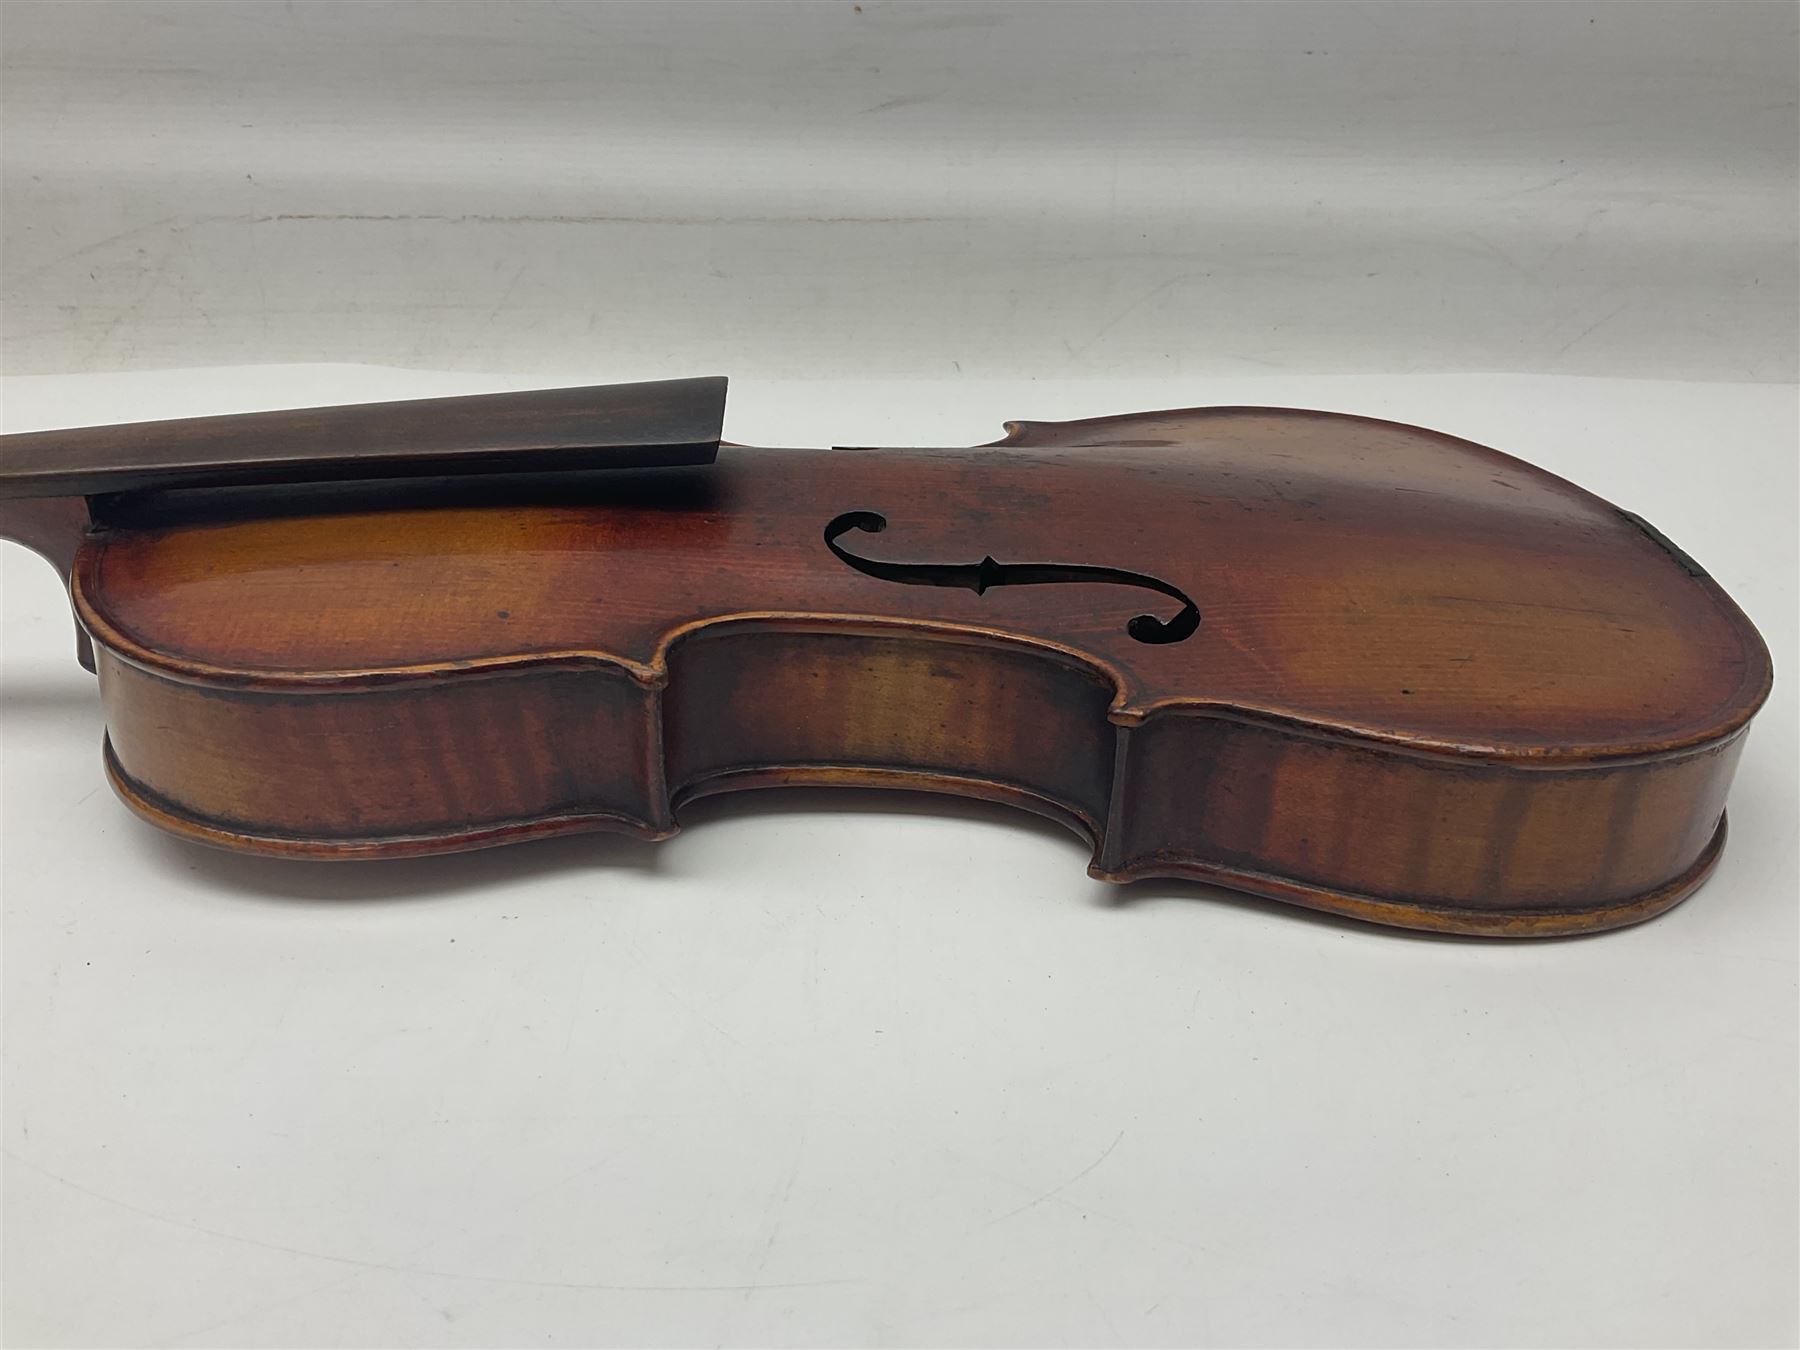 Saxony violin c1890 with 35.5cm two-piece maple back and ribs and spruce top L59cm overall; in carry - Image 6 of 15